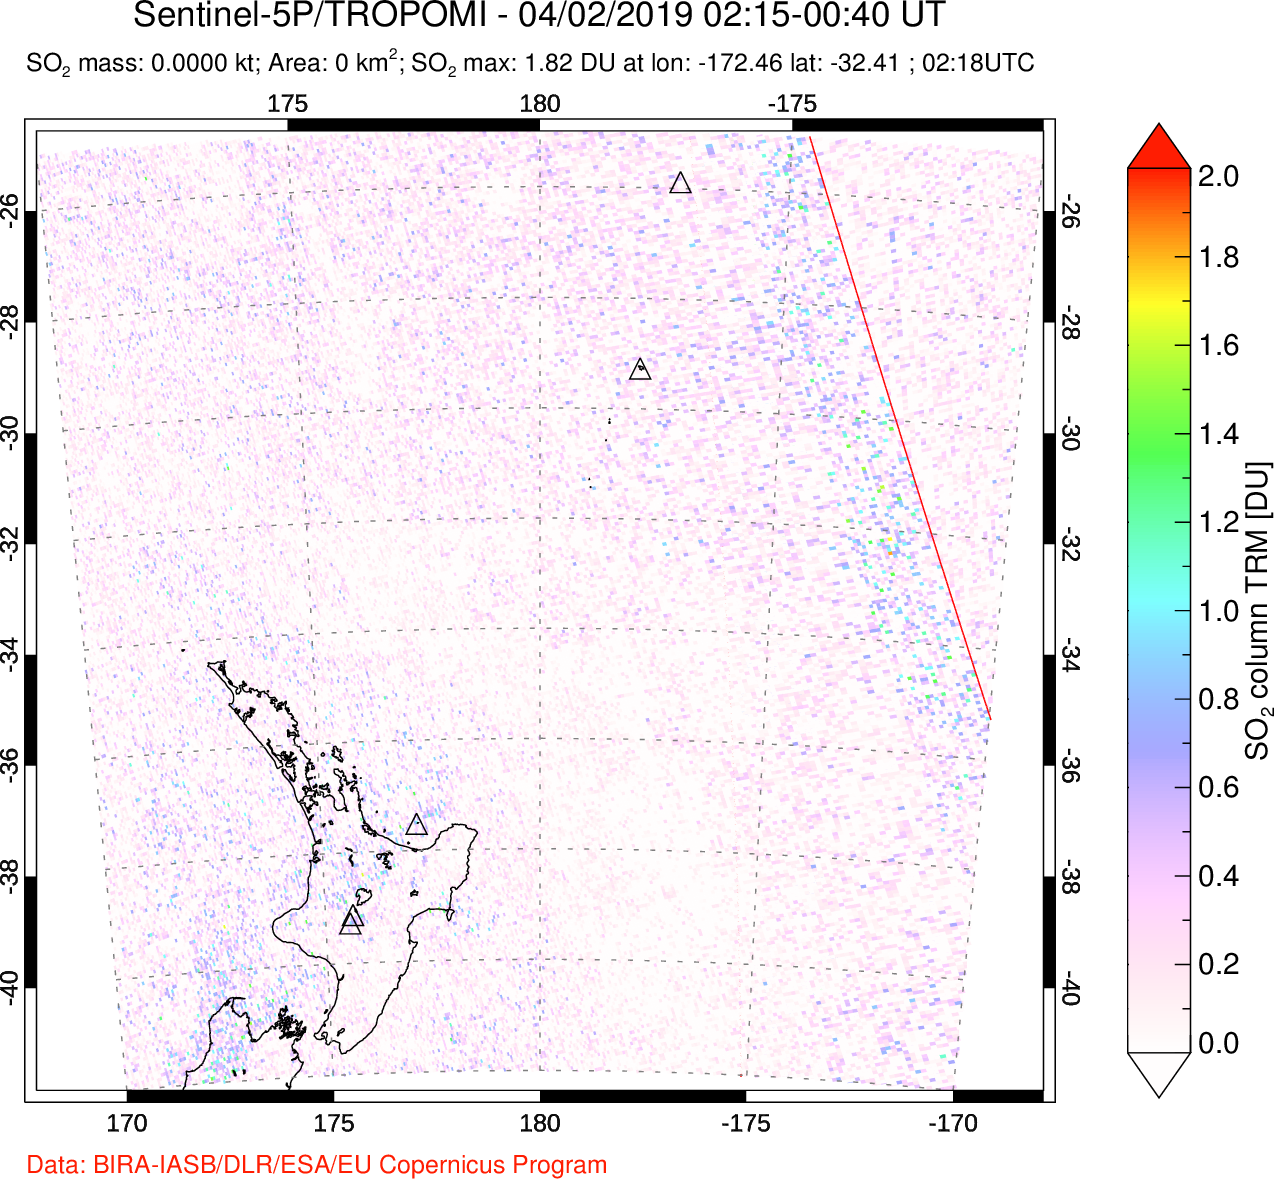 A sulfur dioxide image over New Zealand on Apr 02, 2019.